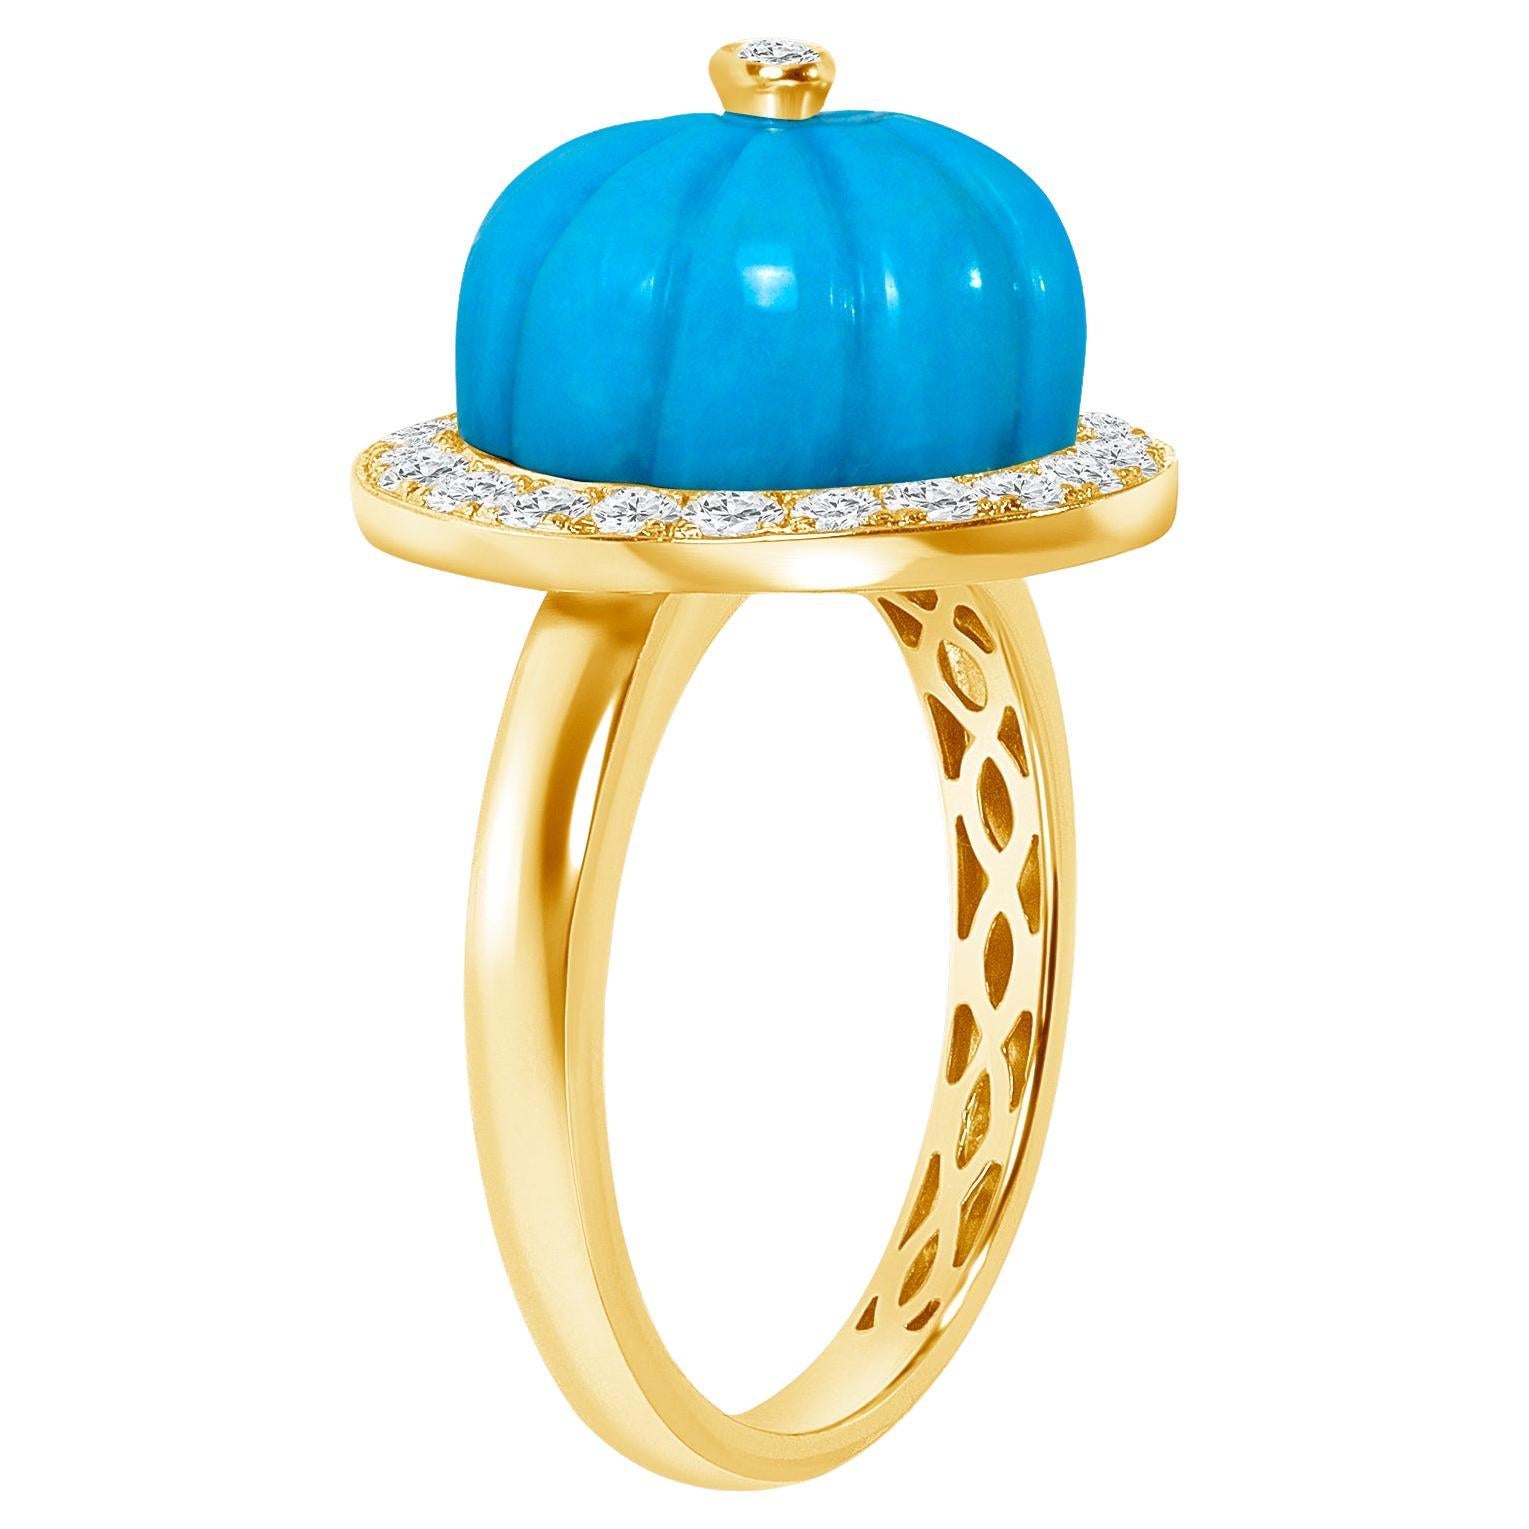 Step into sophistication with this unique ring, meticulously fashioned in luxurious 14k gold, showcasing a mesmerizing turquoise gemstone encircled by shimmering diamonds. Its exquisite design exudes elegance and style, making it the perfect